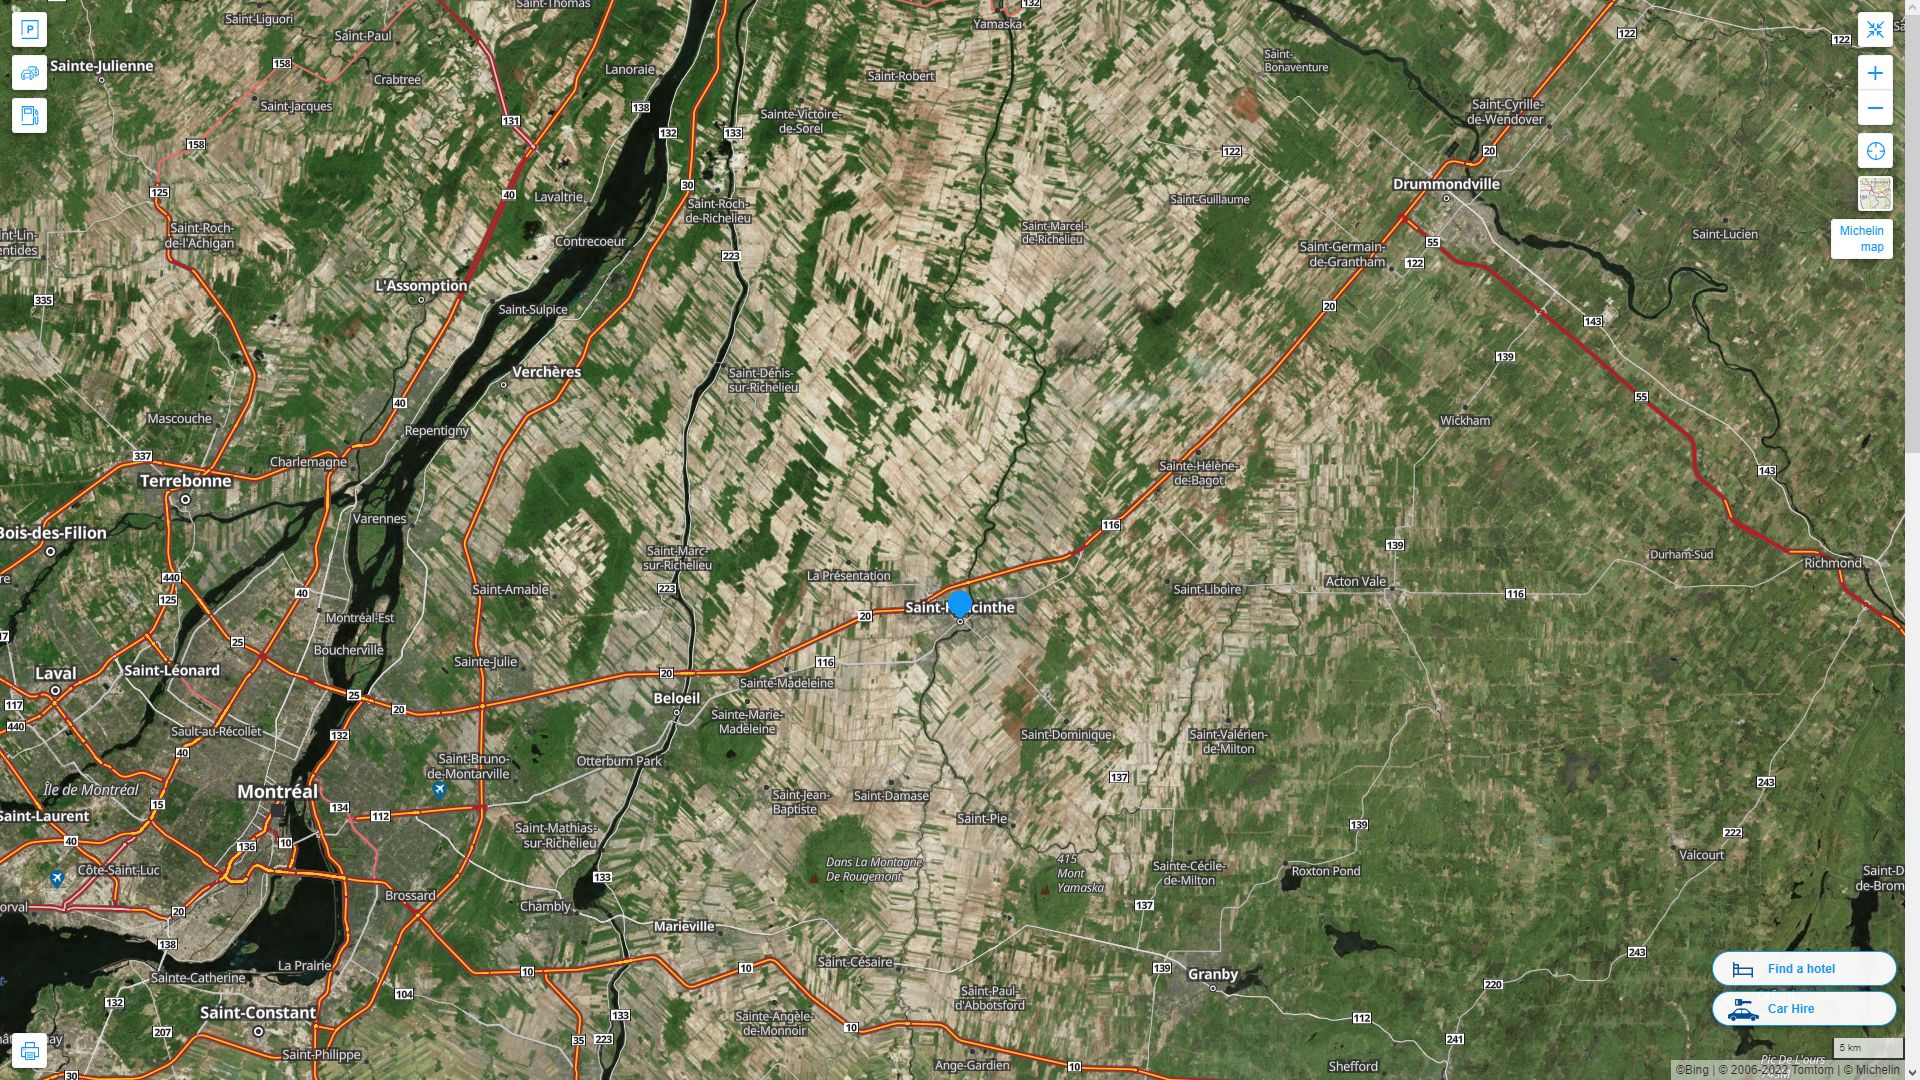 Saint Hyacinthe Highway and Road Map with Satellite View